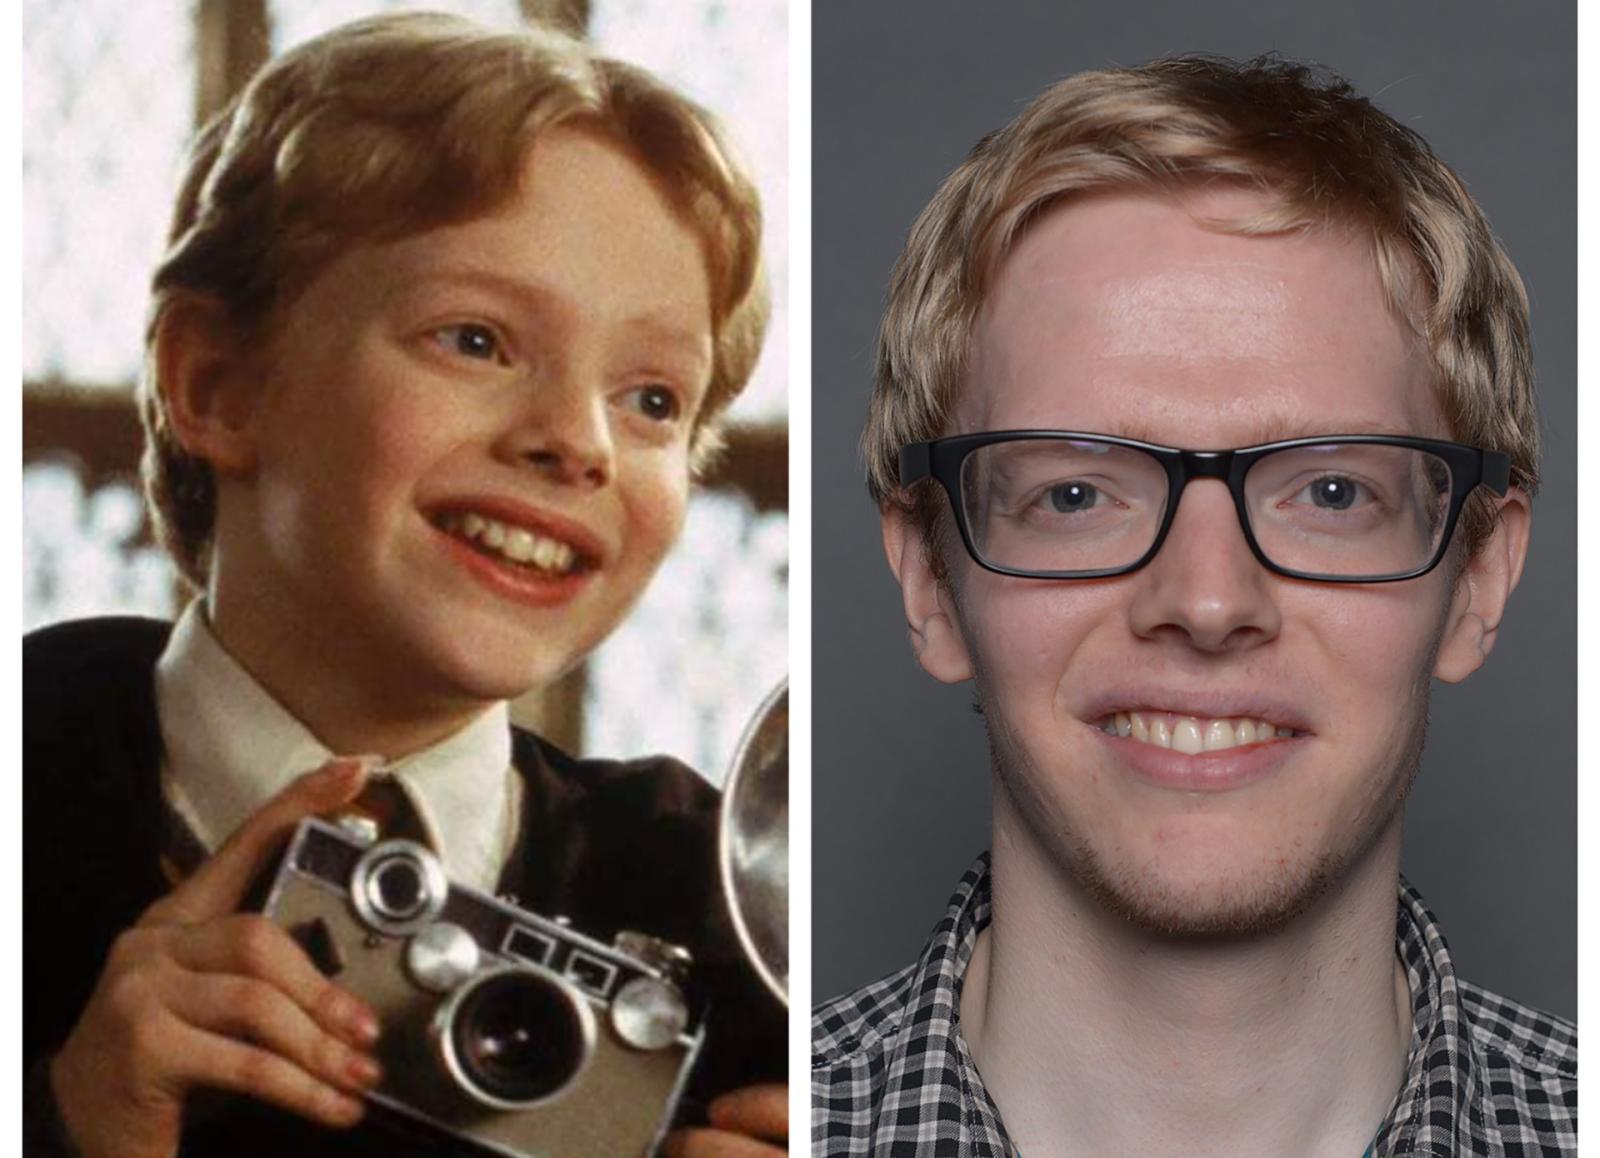 20 Years On: Here's What The Cast of Harry Potter Look Like Now - image 10